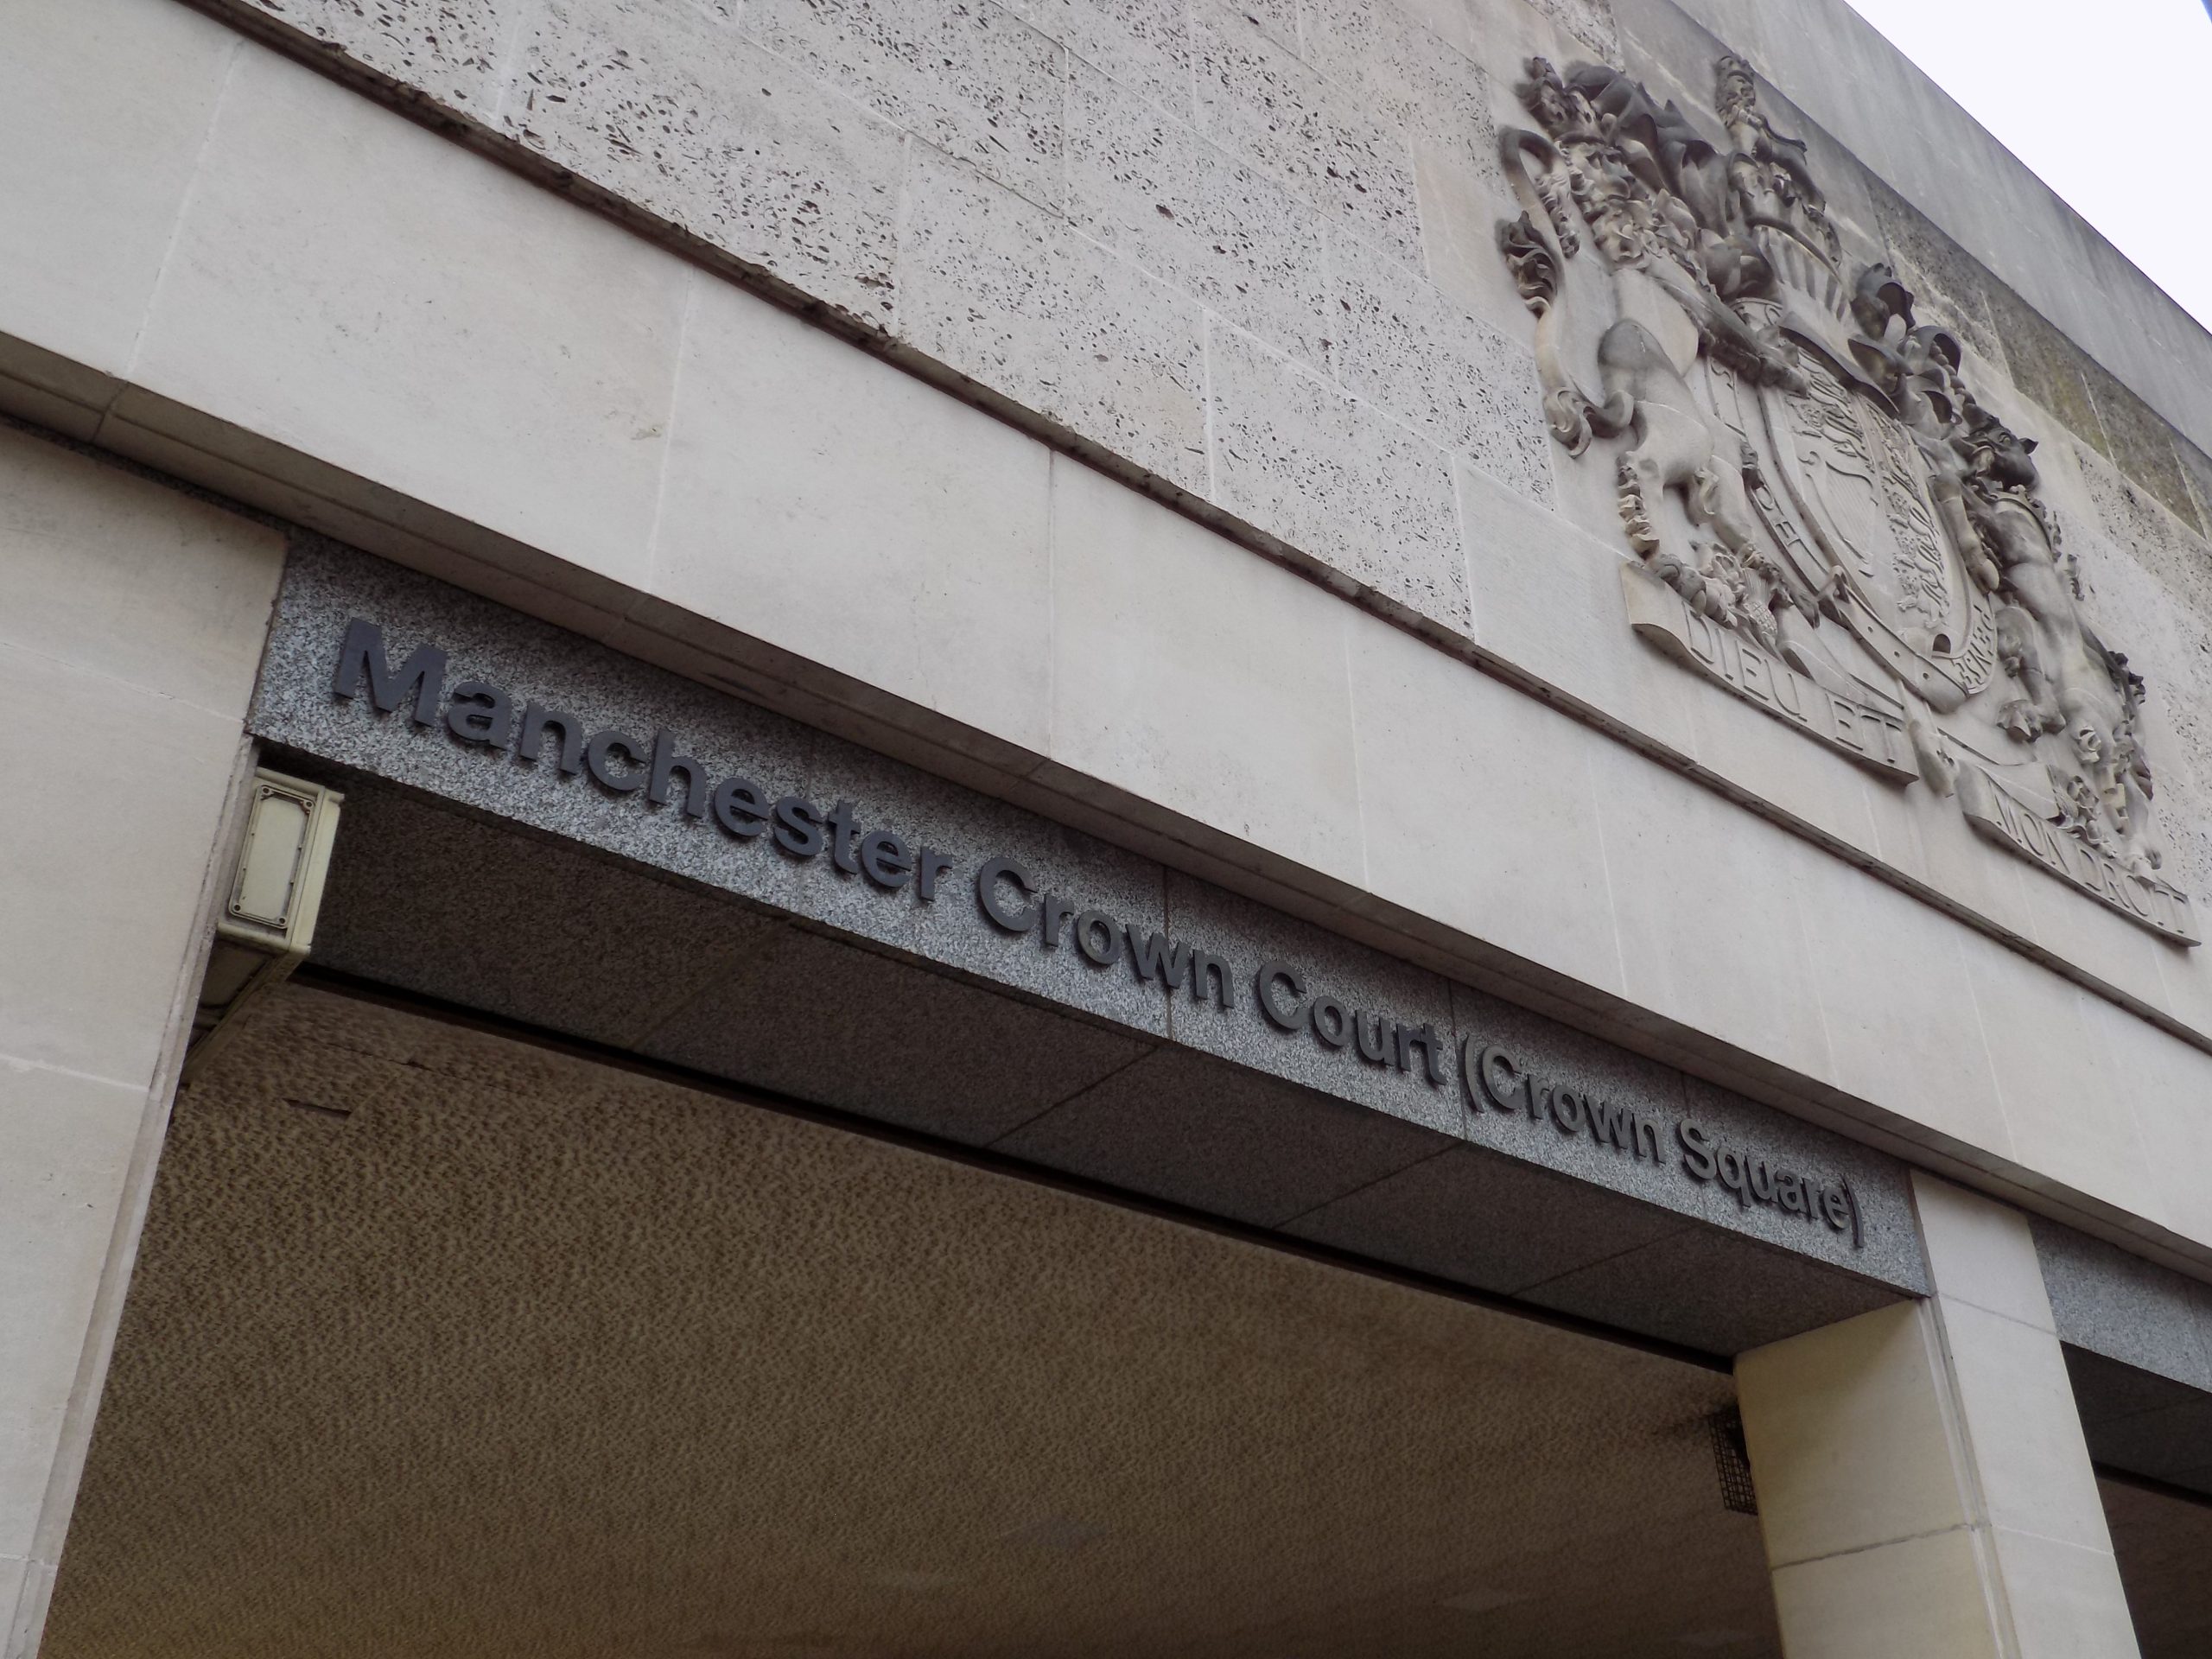 Salford teacher allegedly told boy "every inch of you is perfect"